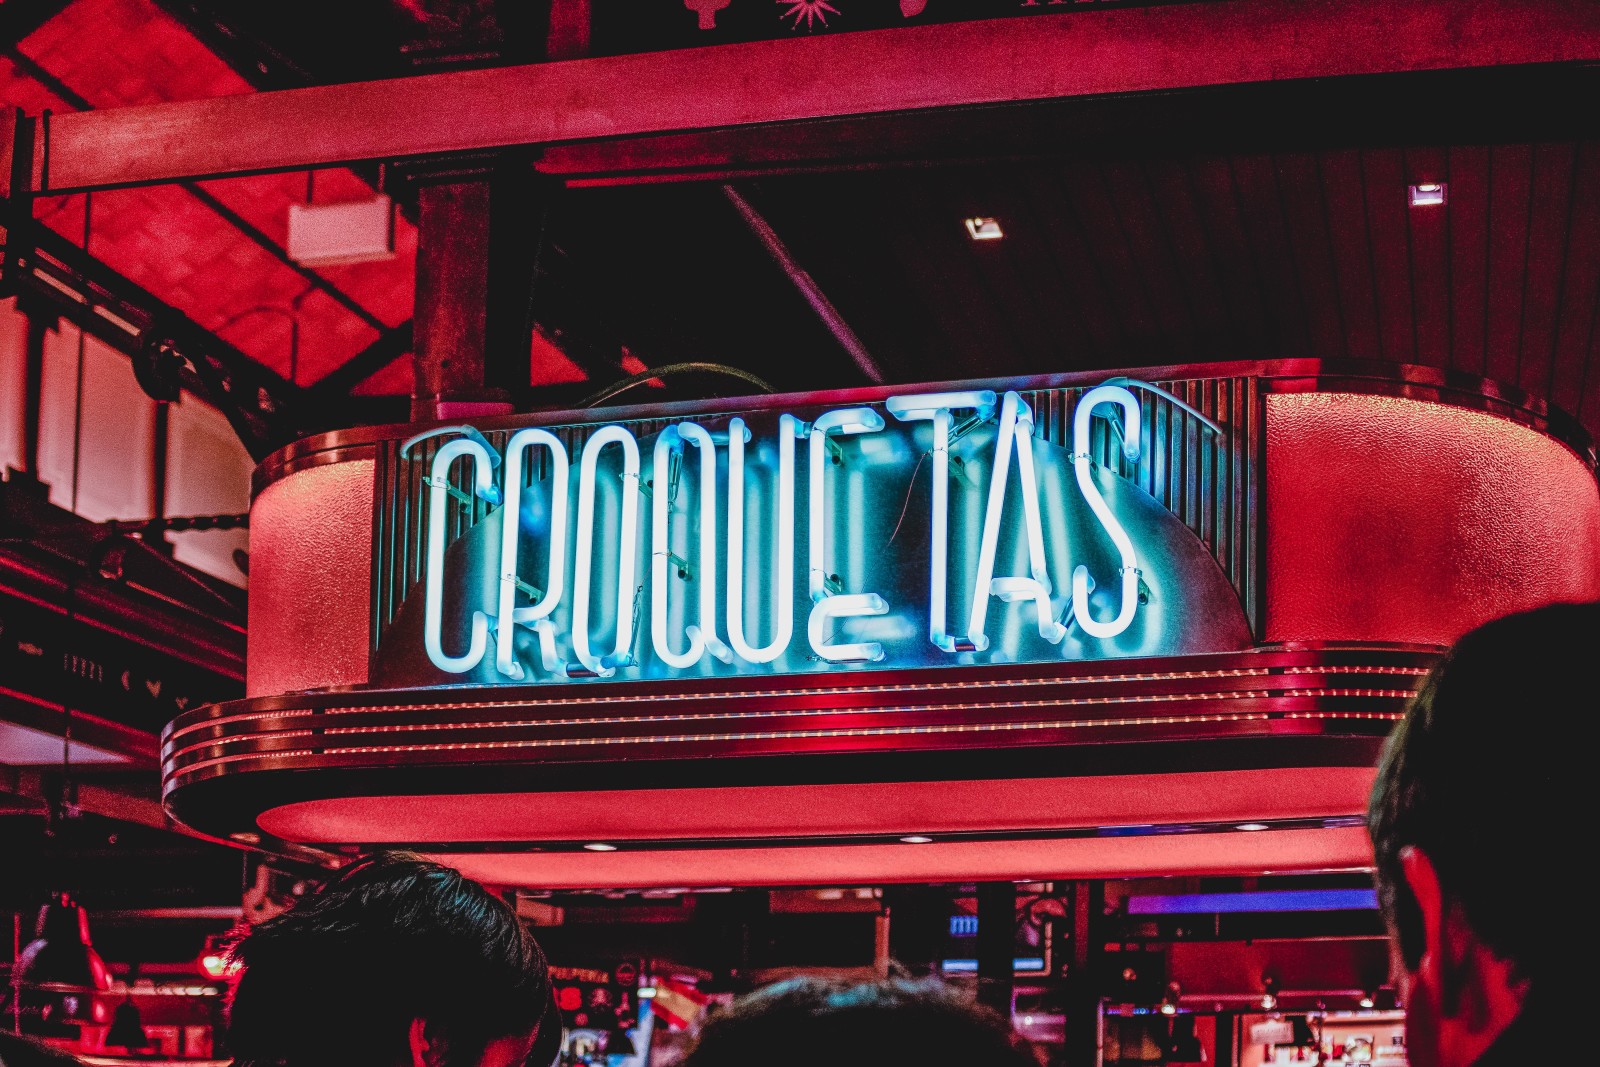 Red neon sign reads "Croquestas" in Madrid, Spain